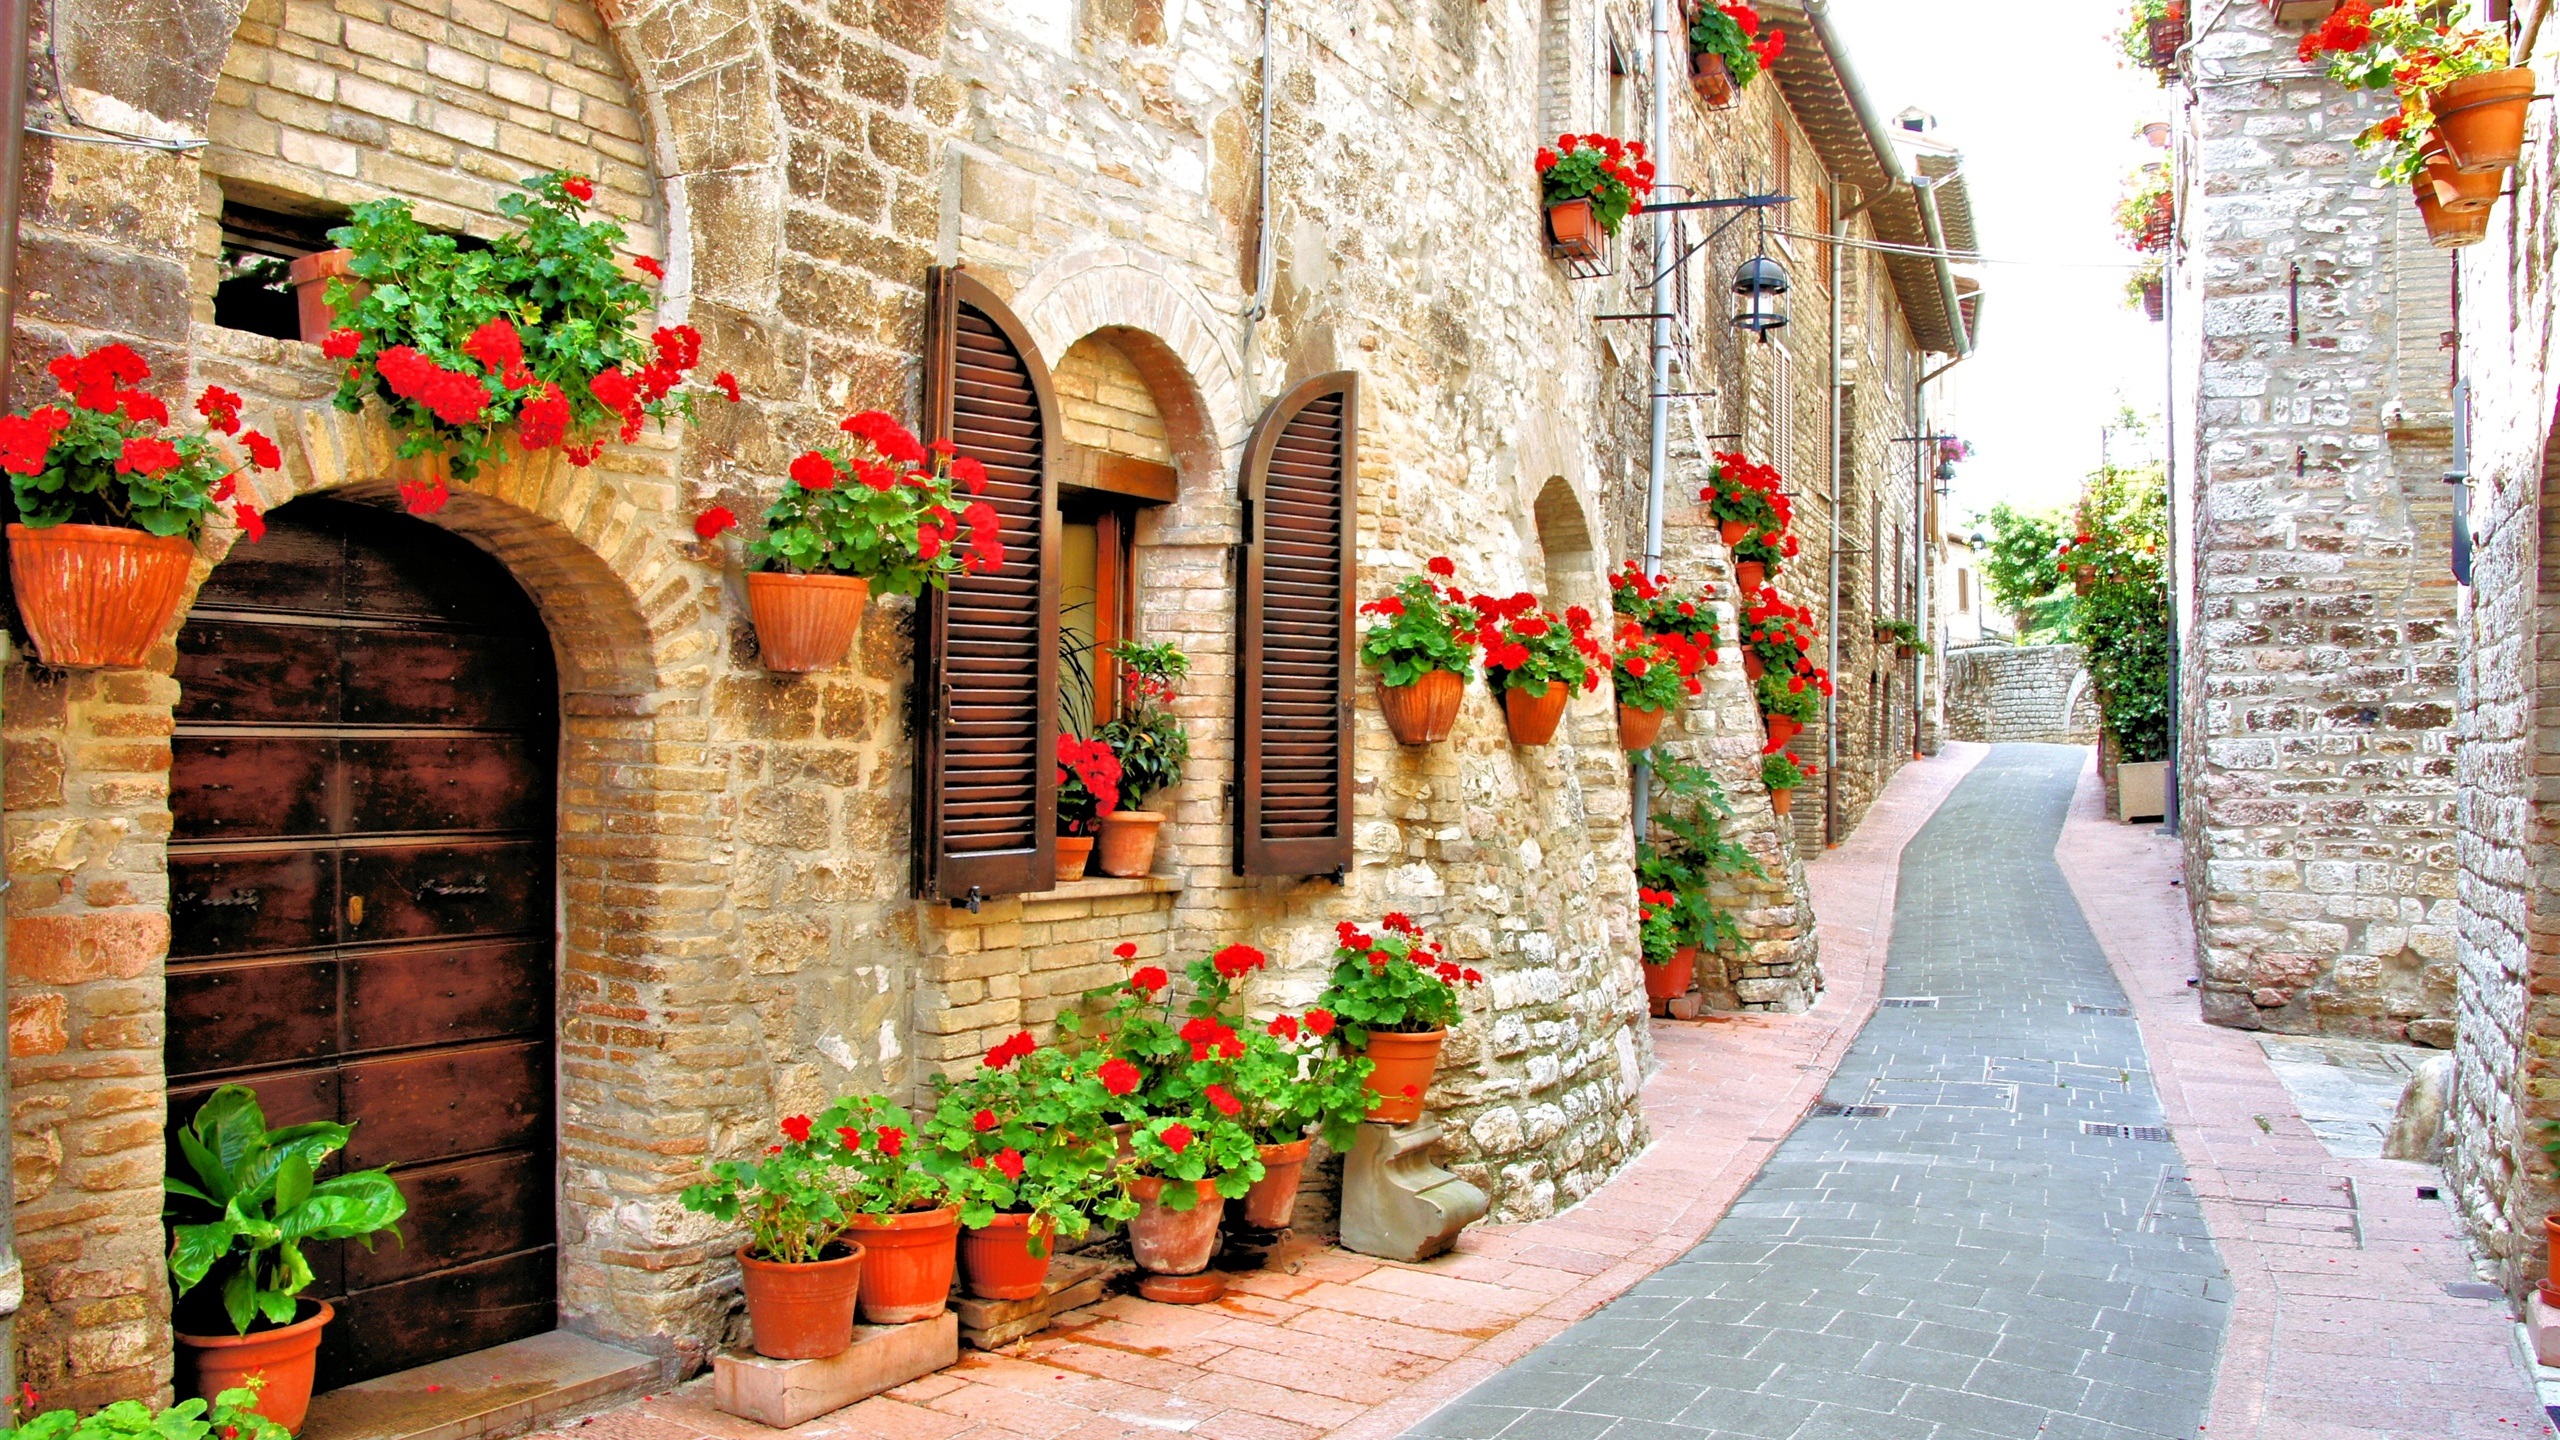 General 2560x1440 Italy house flowers building street road sunlight daylight